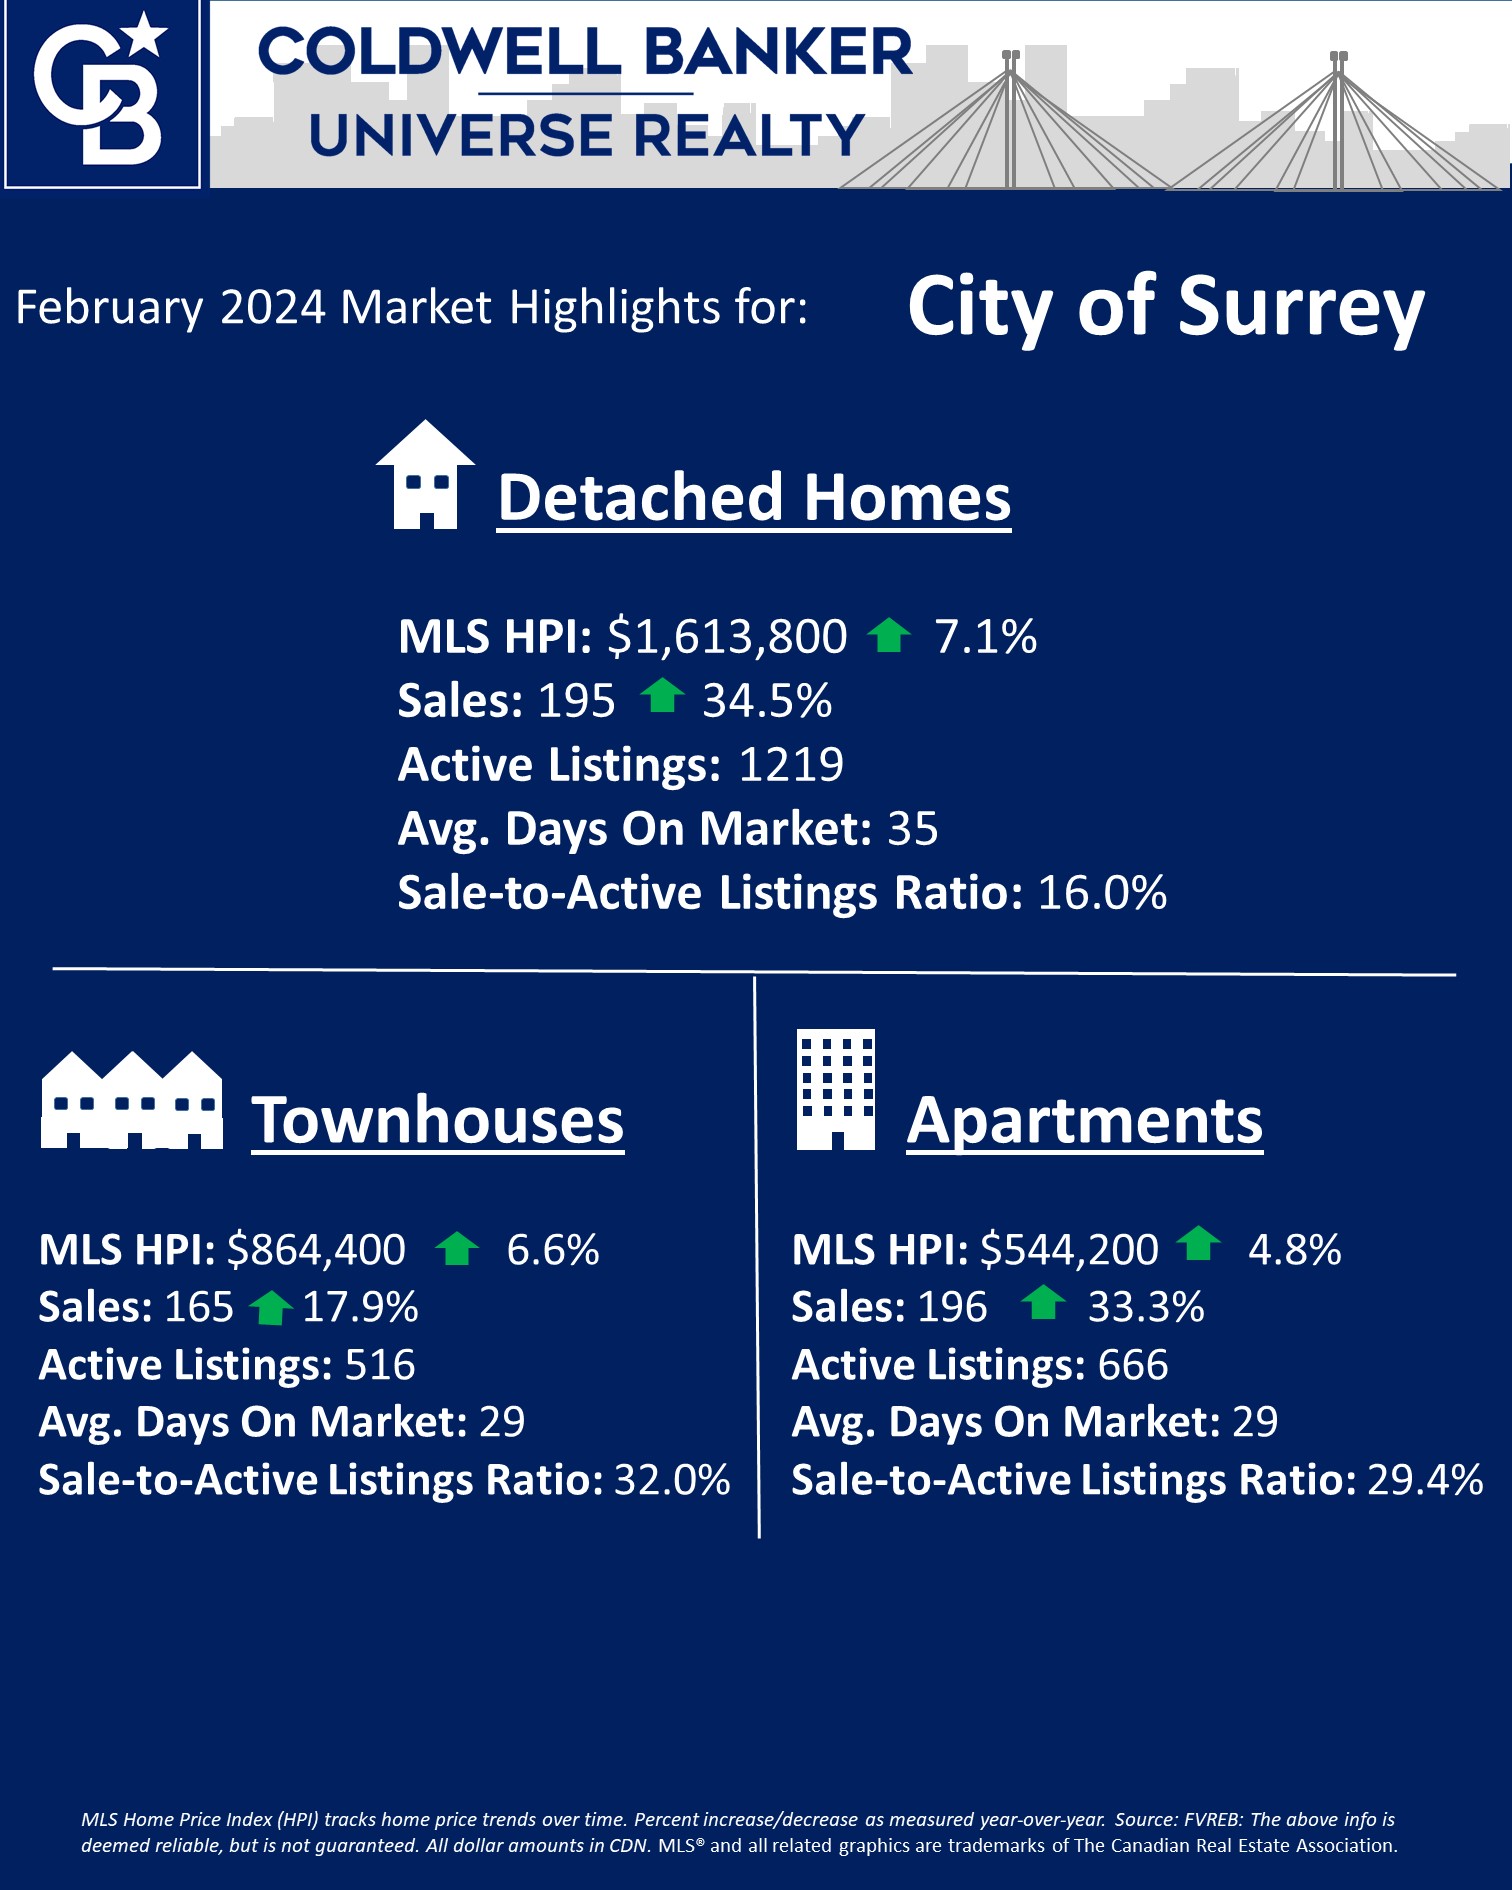 February 2024 Market Update for City of Surrey